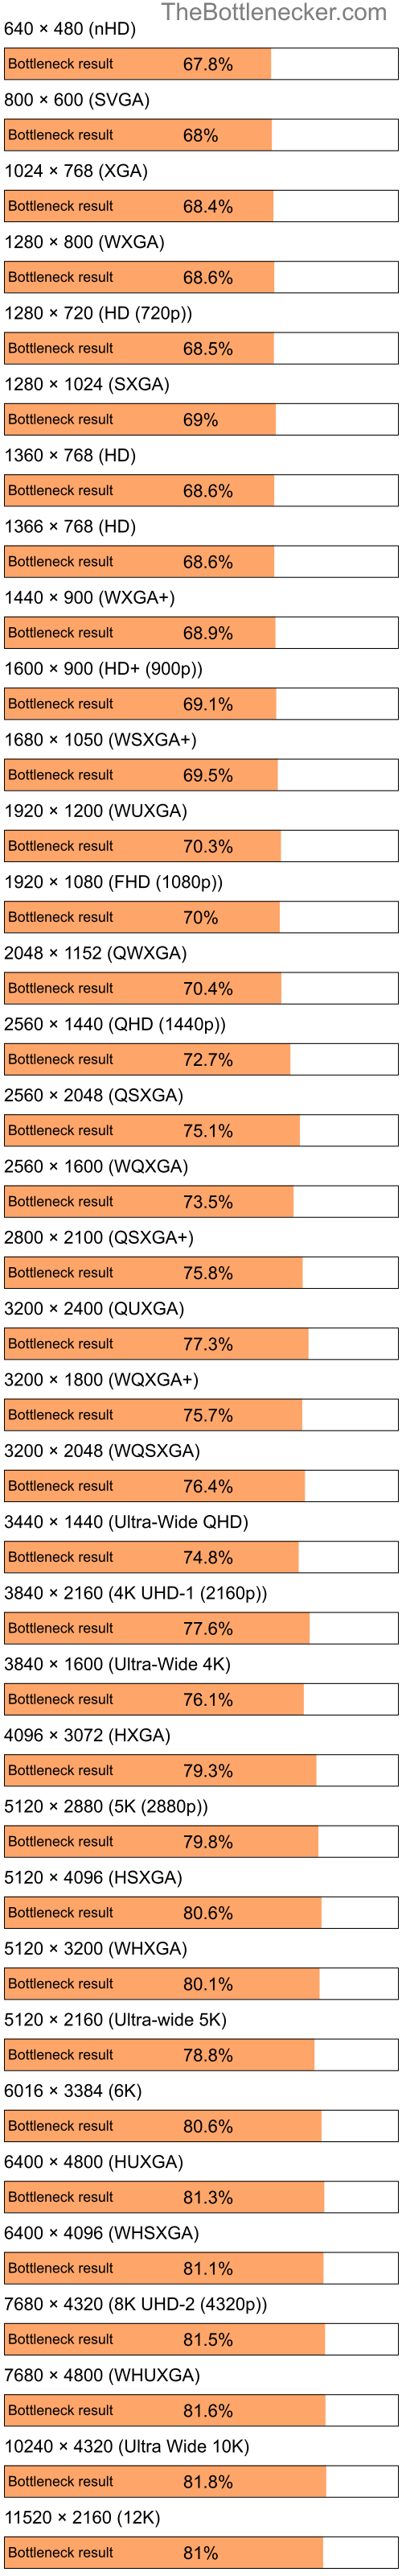 Bottleneck results by resolution for Intel Pentium 4 and AMD Mobility Radeon X1400 in Processor Intense Tasks